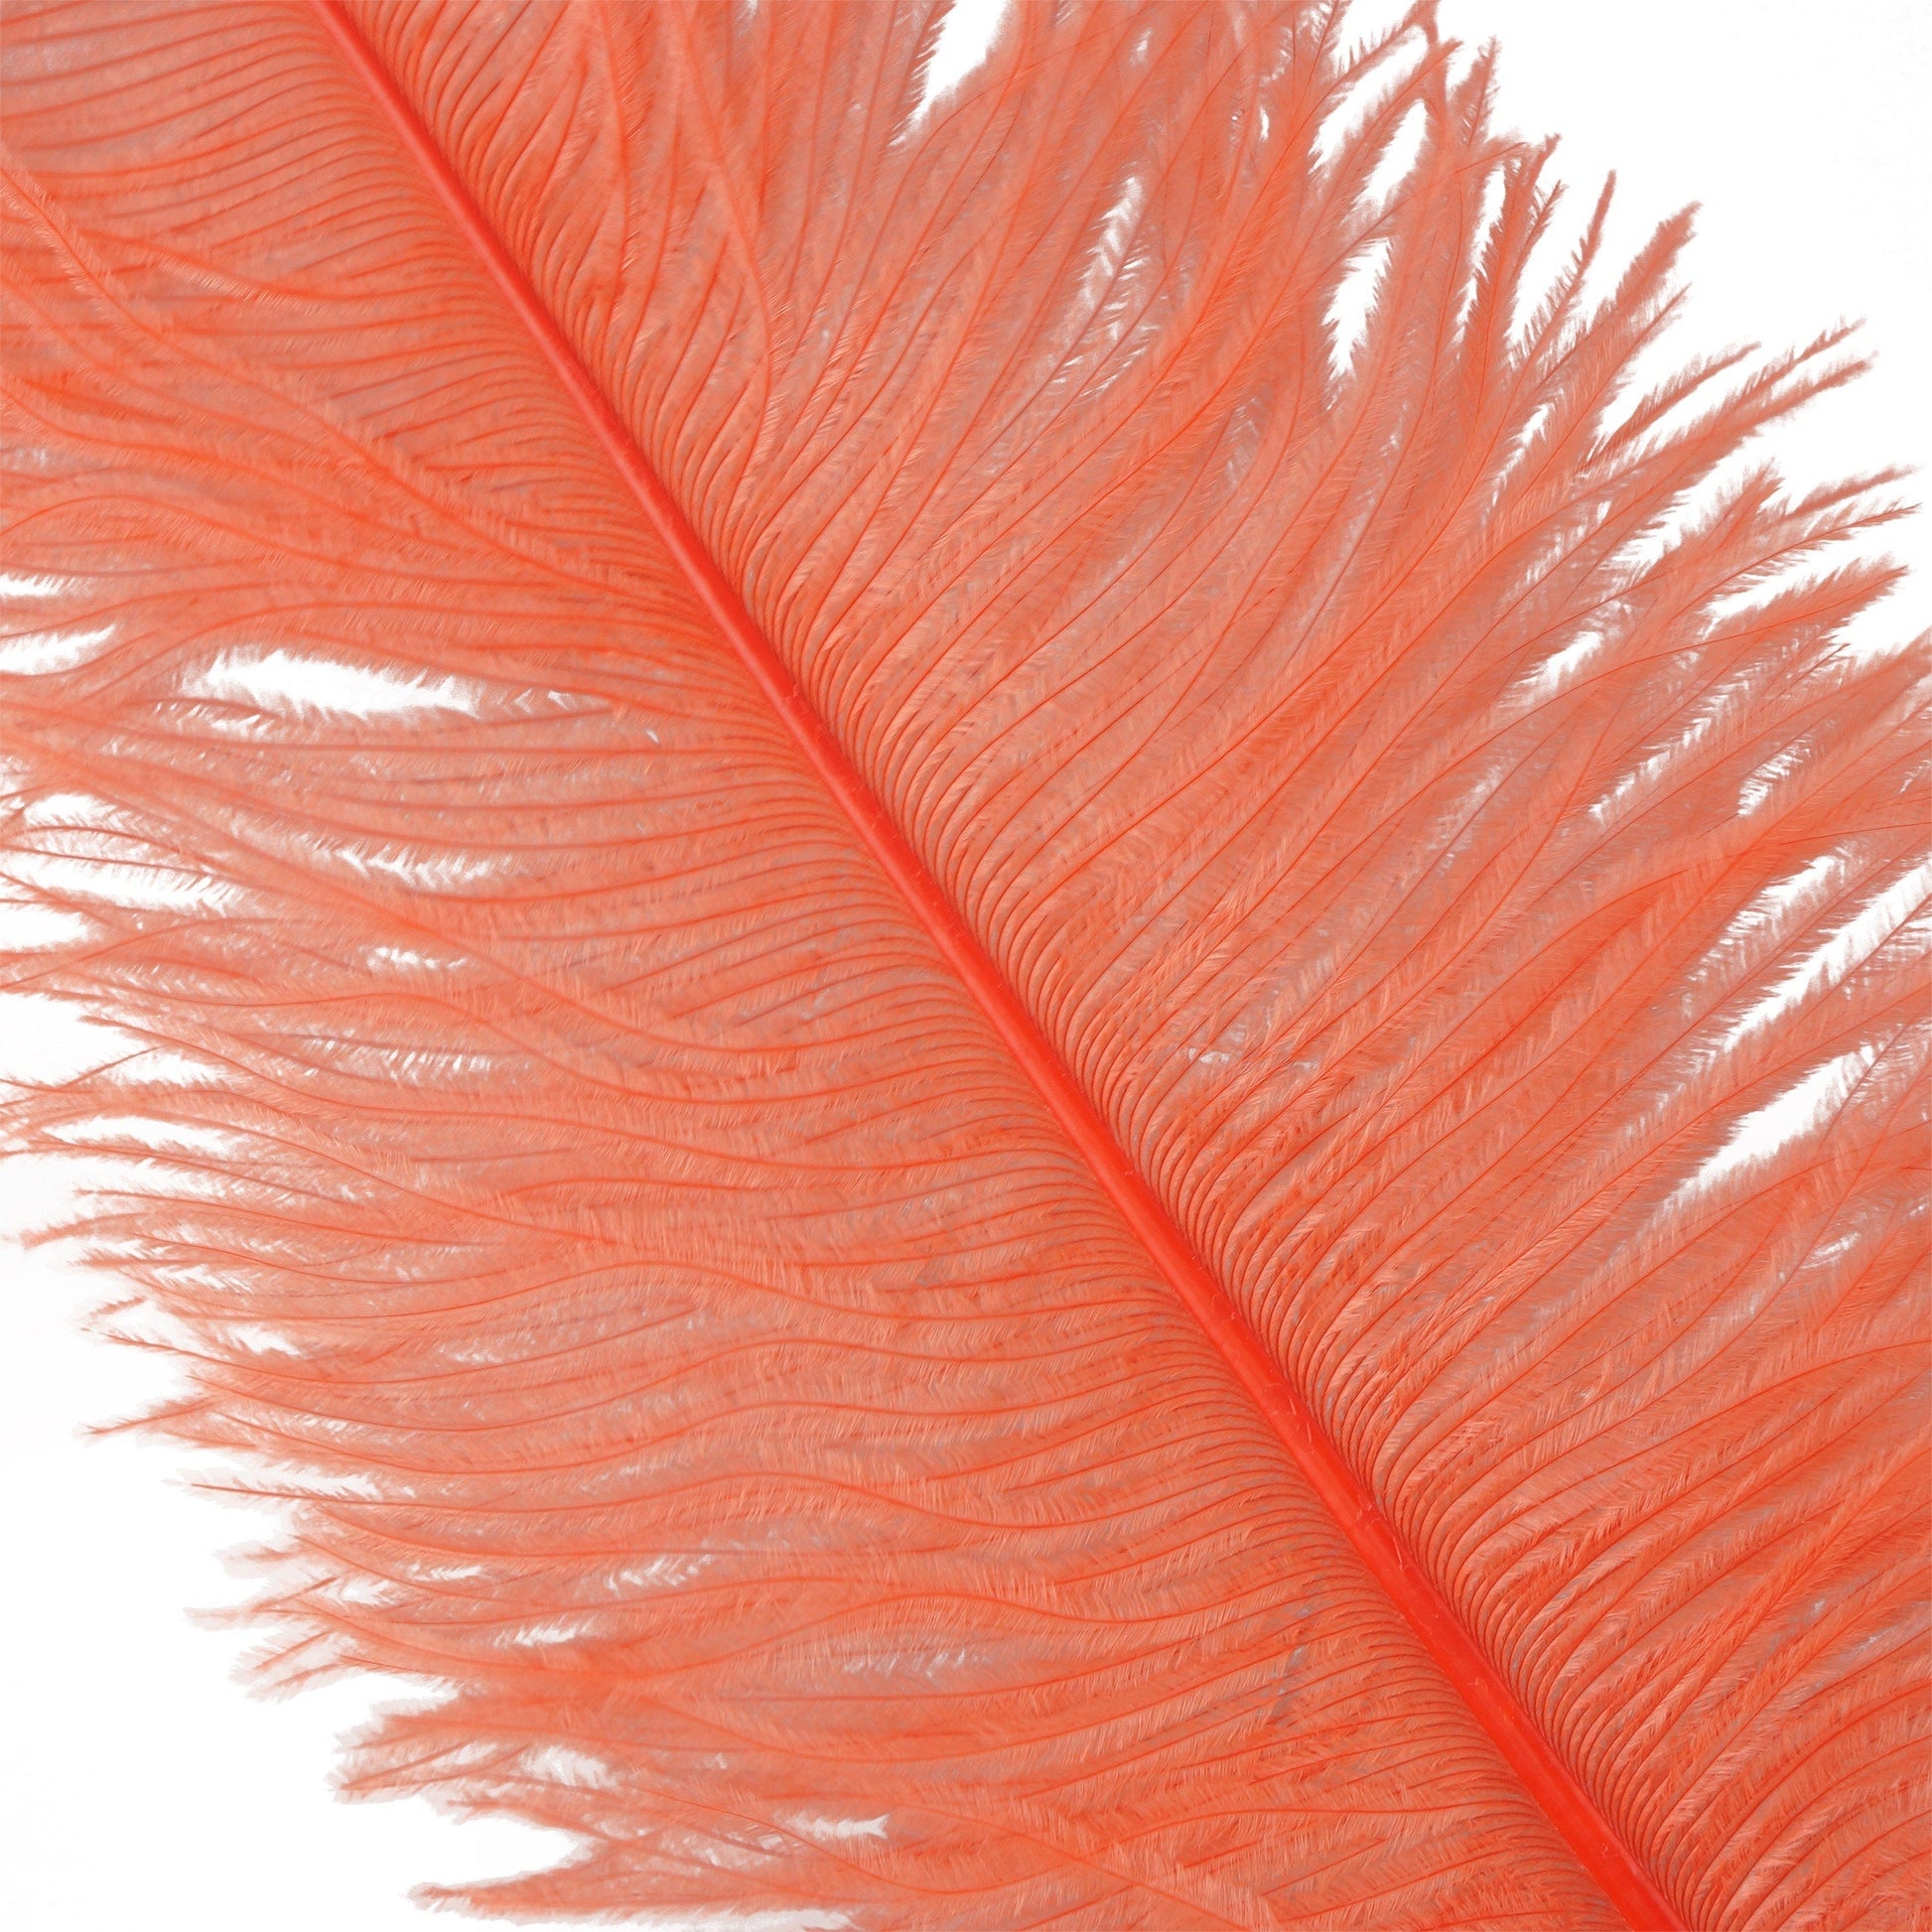 Large Ostrich Feathers - 18-24 Spads - Shocking Pink